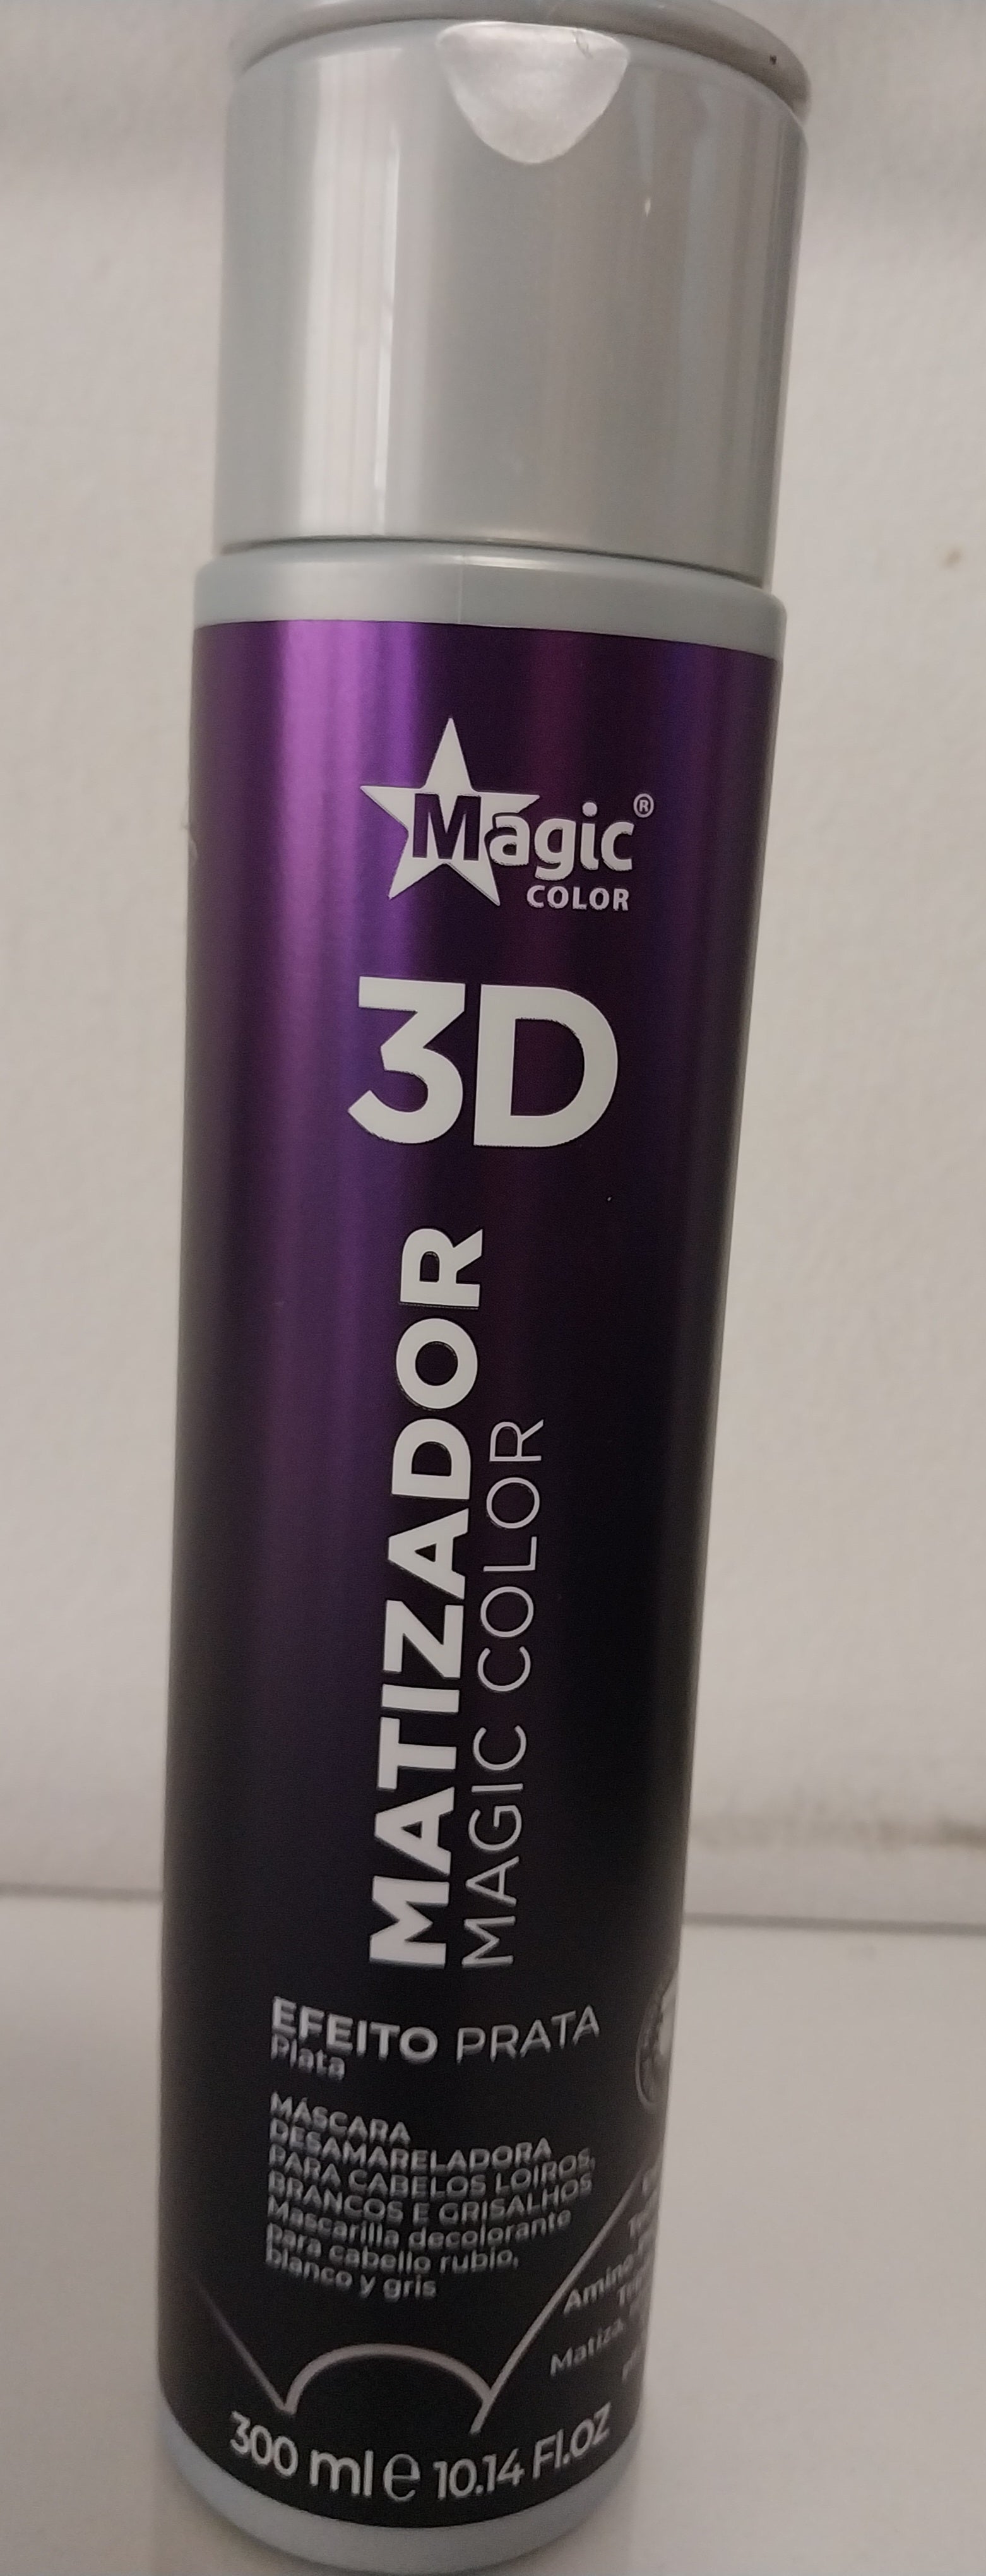 Magic Color Hair Color Silver Effect Hair Color Treatment Tinting Anti Yellow Mask 300ml - Magic Color